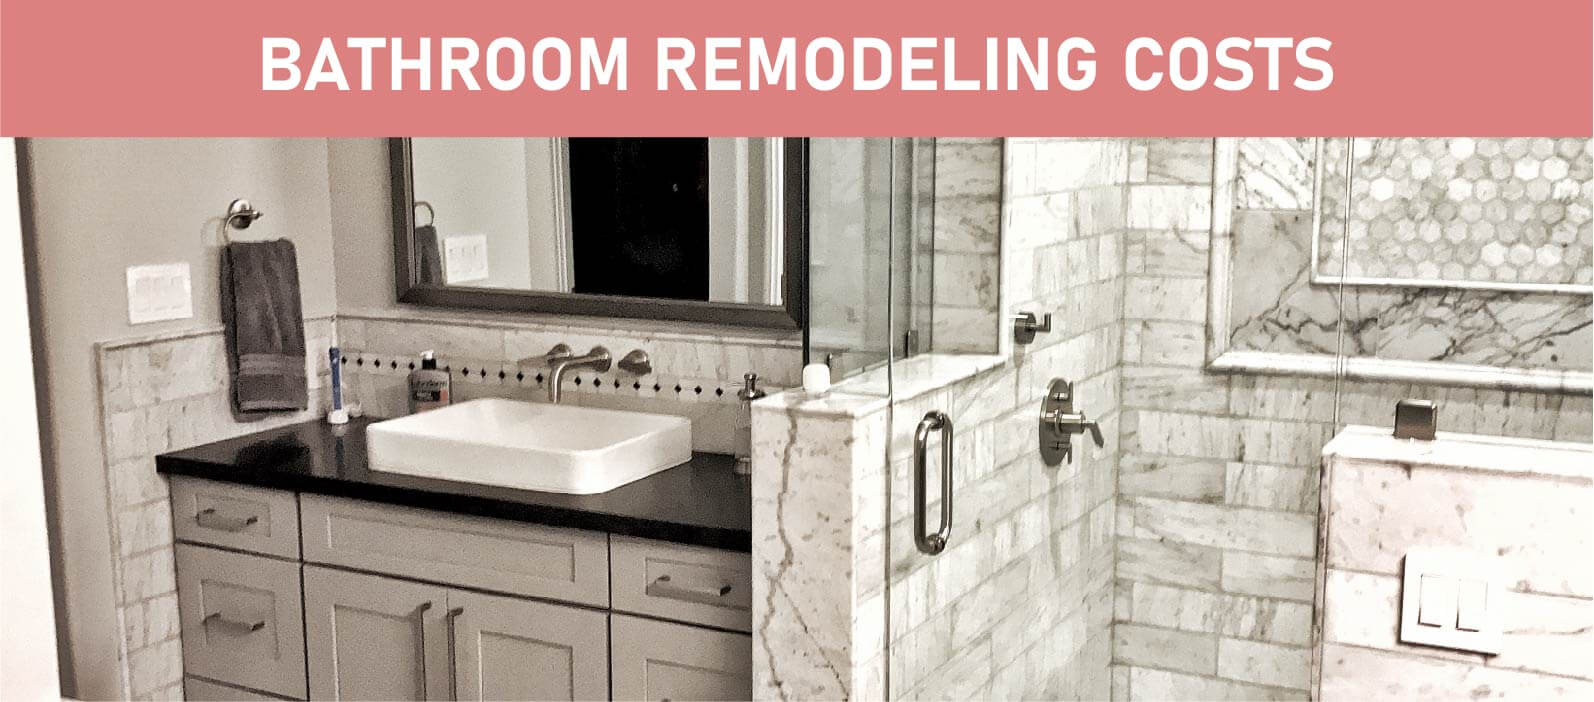 Bathroom Remodeling Costs Featured Image